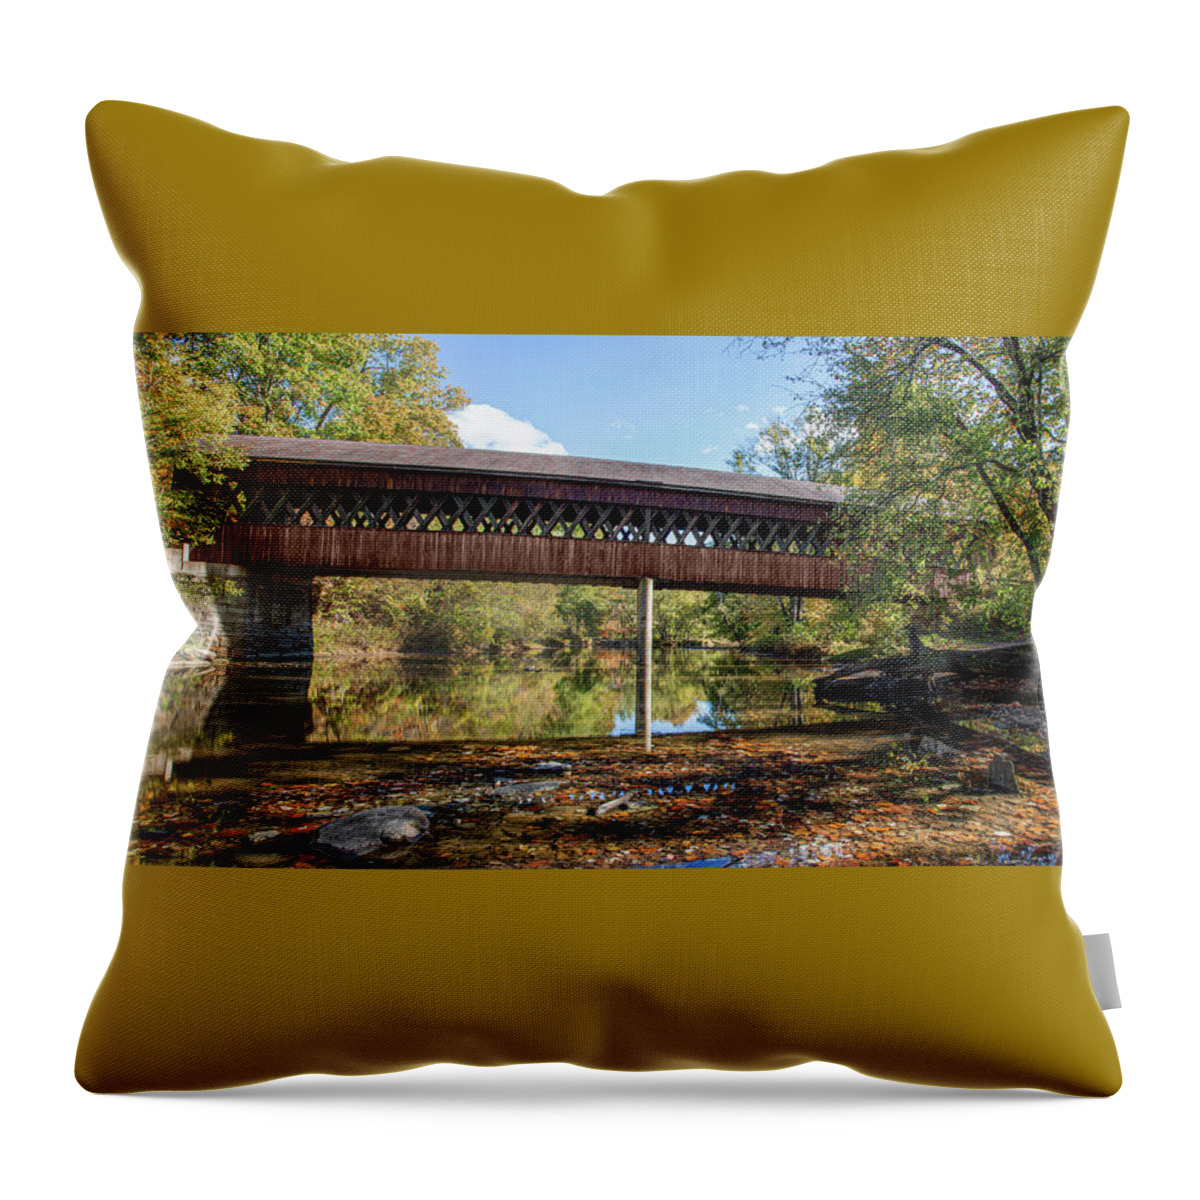 Bridges Throw Pillow featuring the photograph State Road Covered Bridge Panoramic by Dale Kincaid